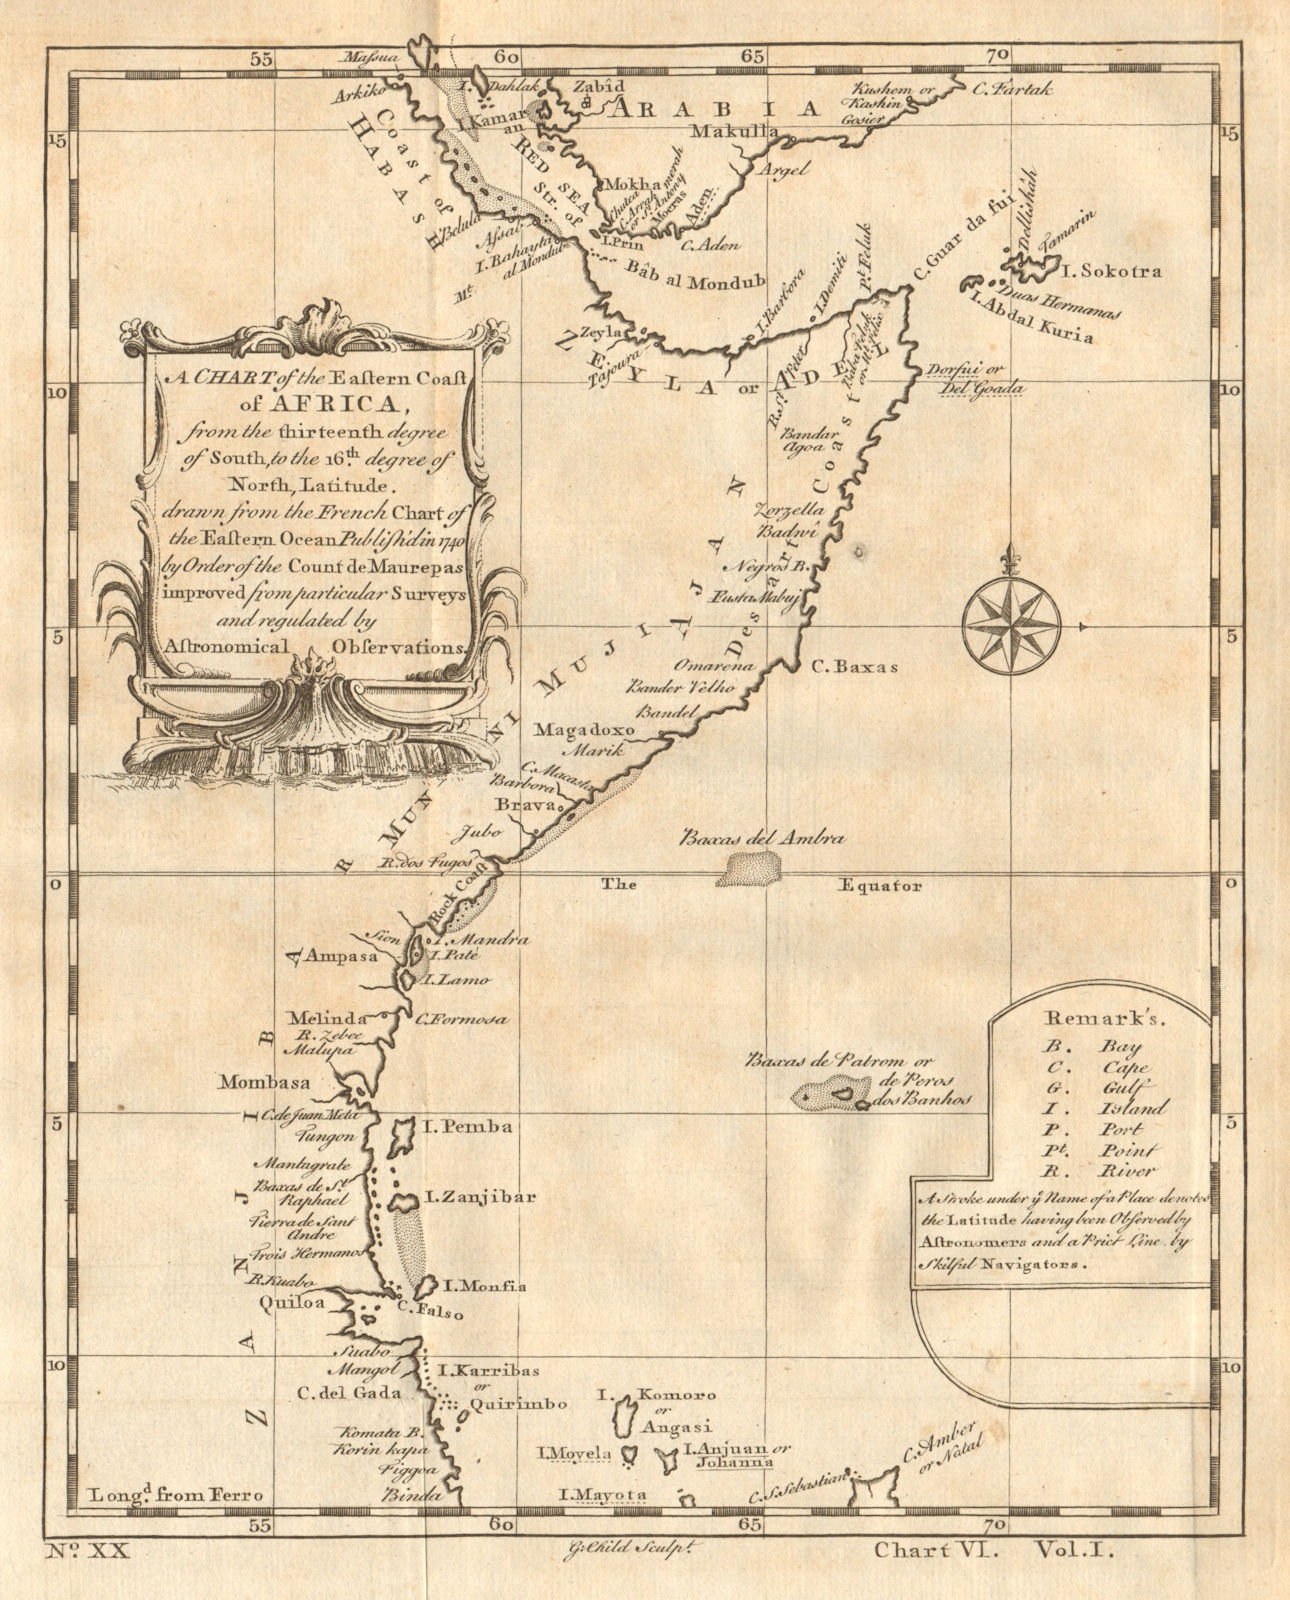 East coast of Africa from 13°S. East Africa Kenya Tanzania. CHILD 1745 old map